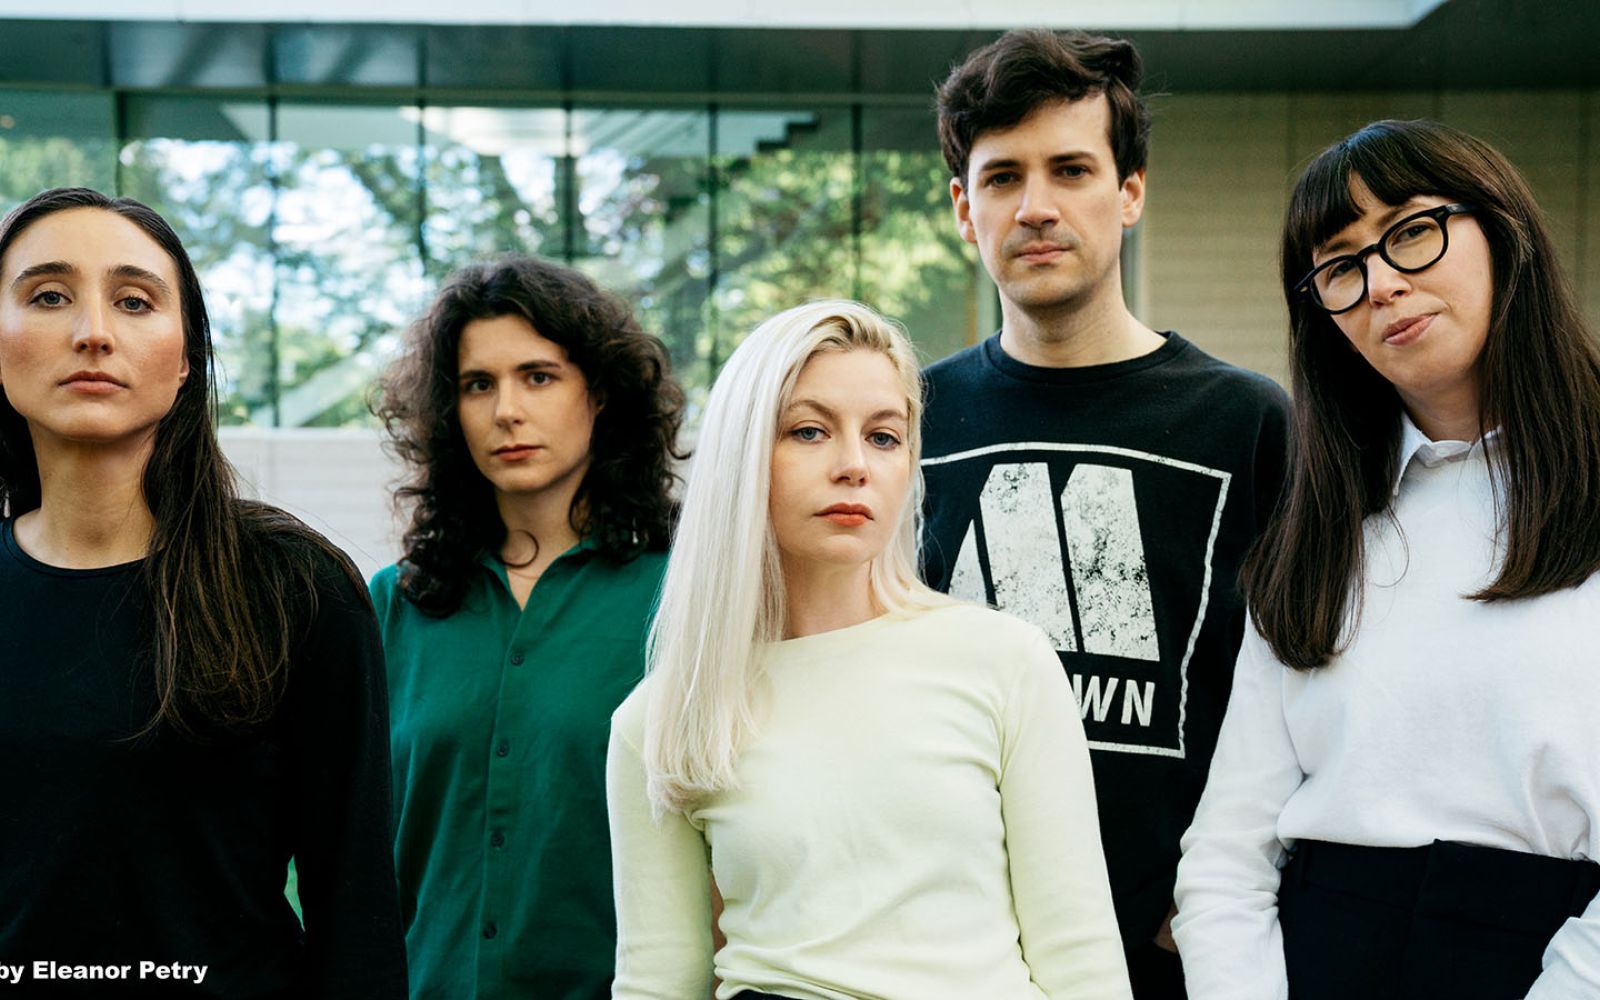 Alvvays will headline this year's Middle Waves Music Festival at Parkview Field on June 15.